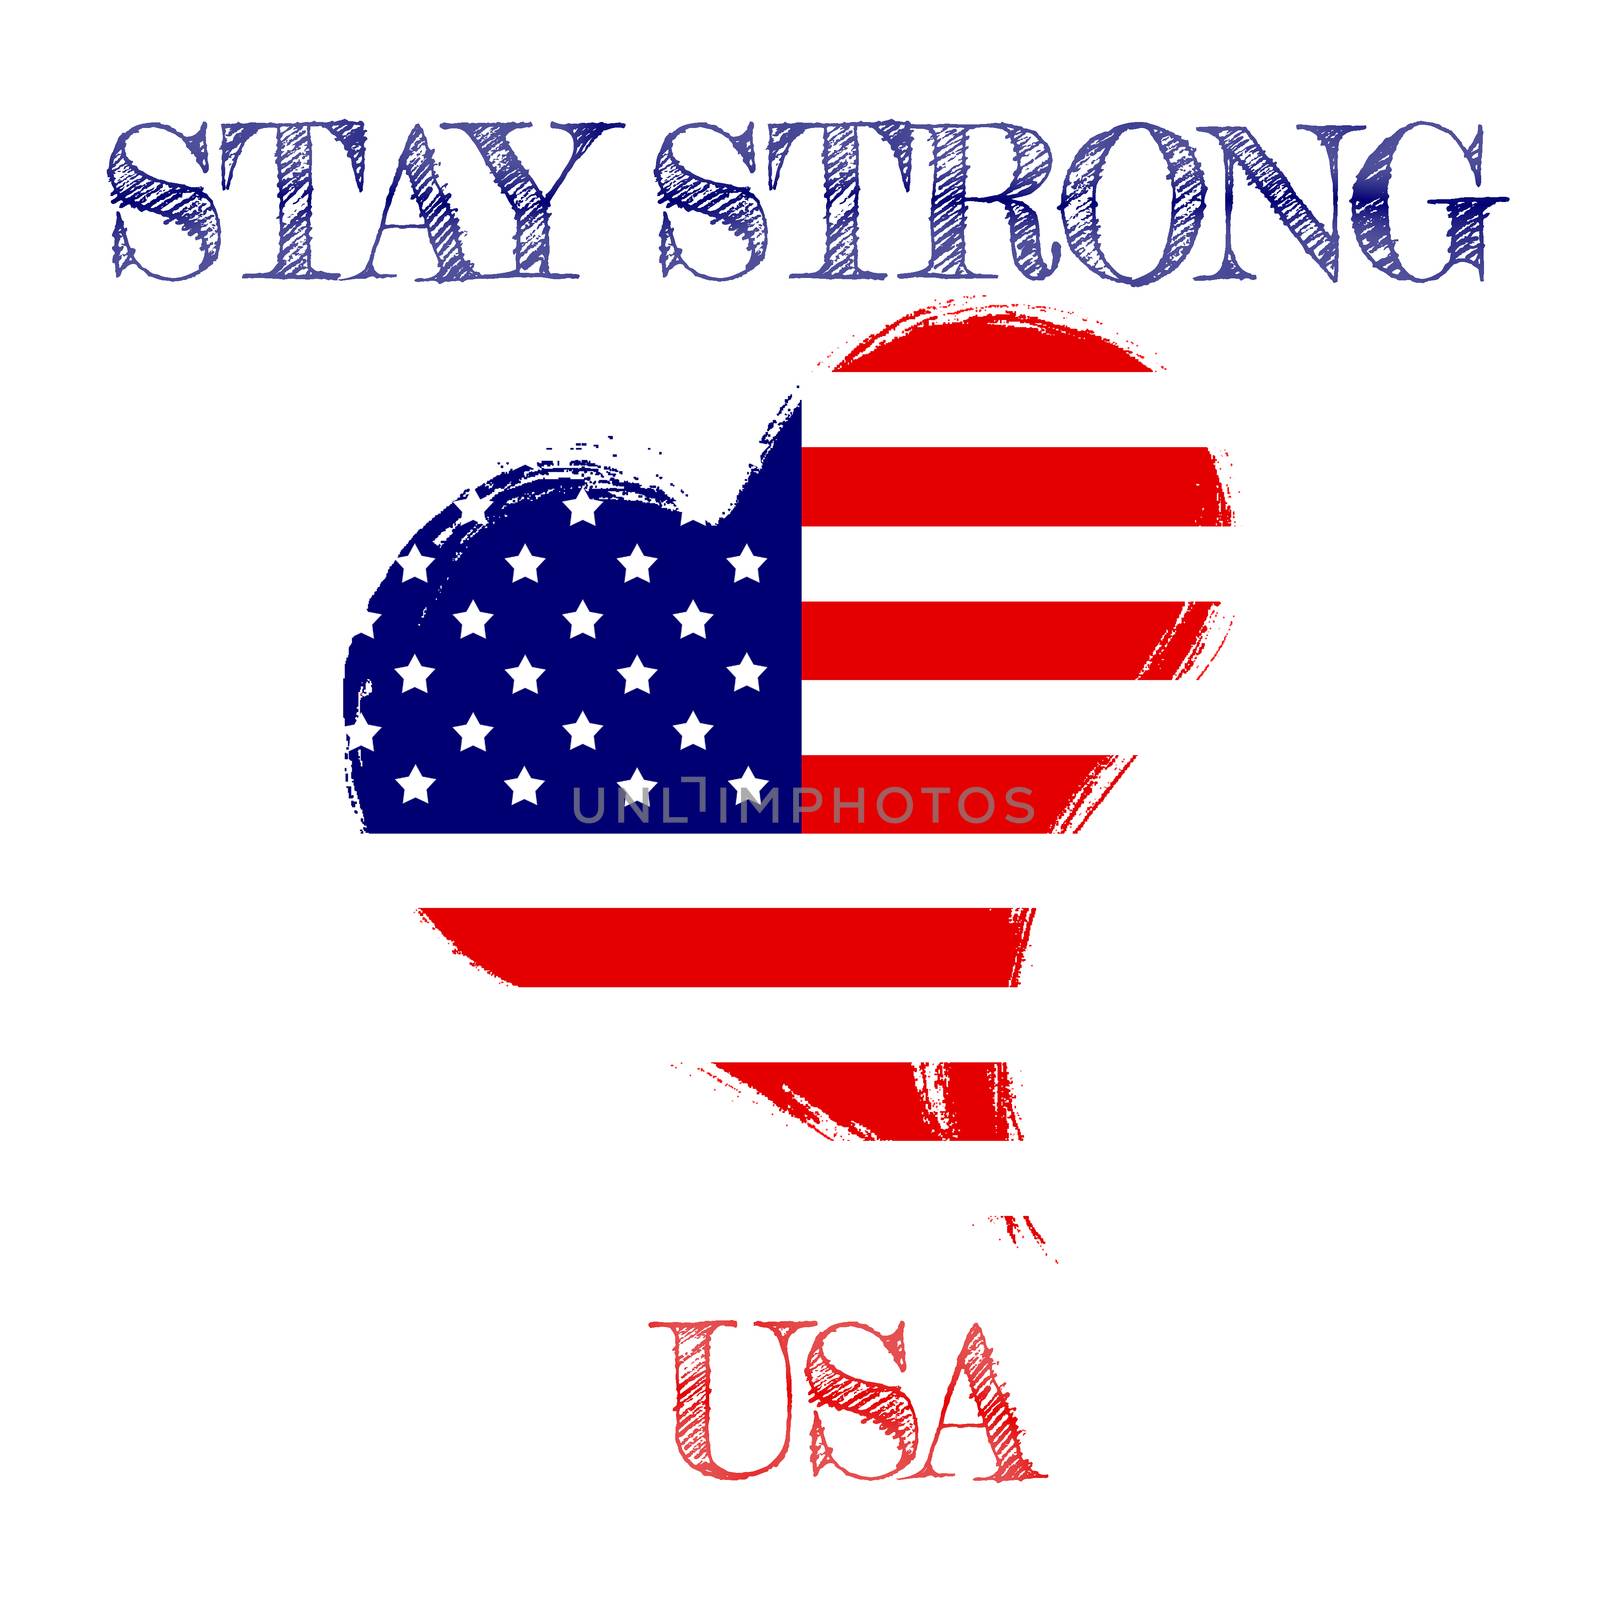 Patriotic inspirational positive quote about novel coronavirus covid-19 pandemic. Stay strong Usa.